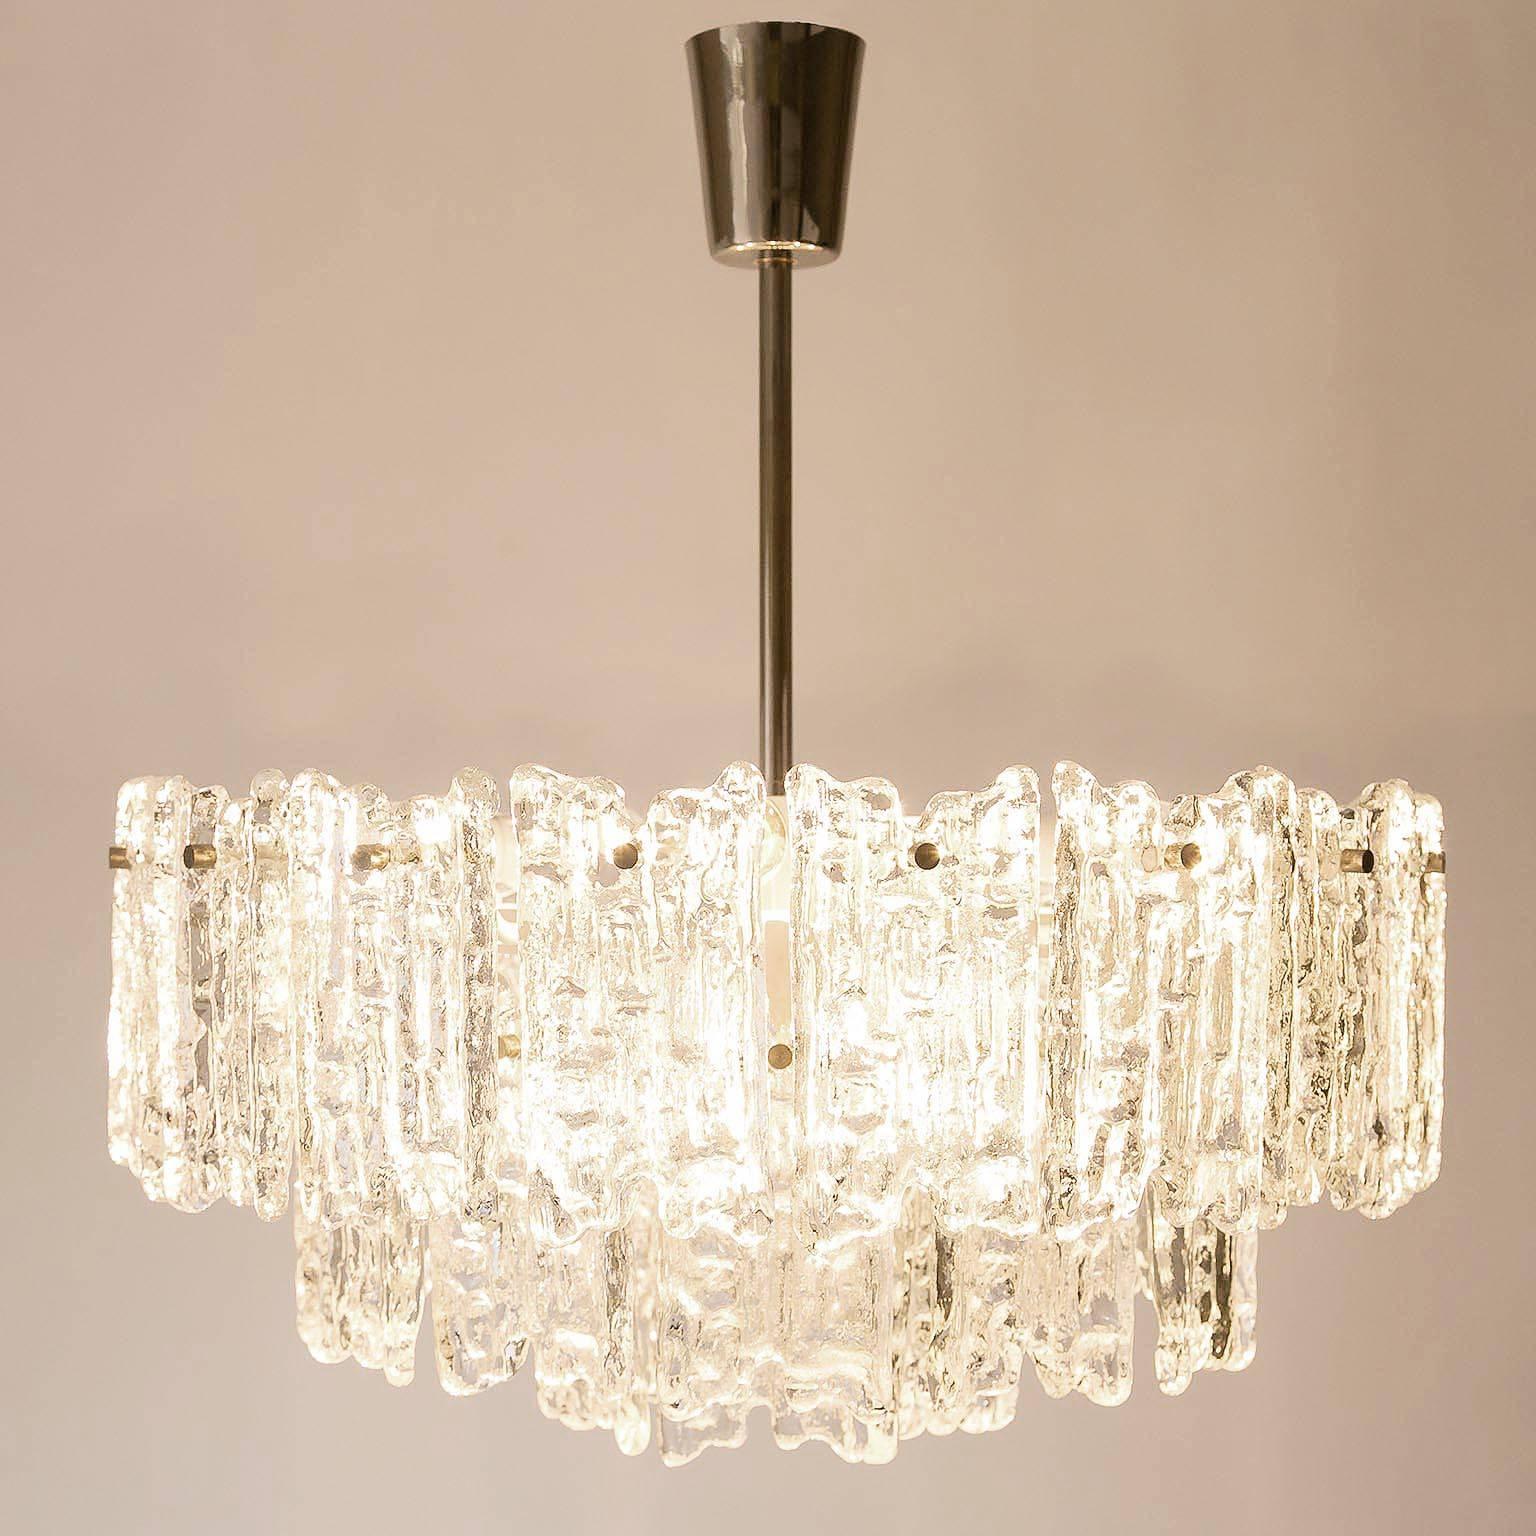 Mid-20th Century Kalmar Chandelier, Rare Ice Glass, 1960s, One of Two